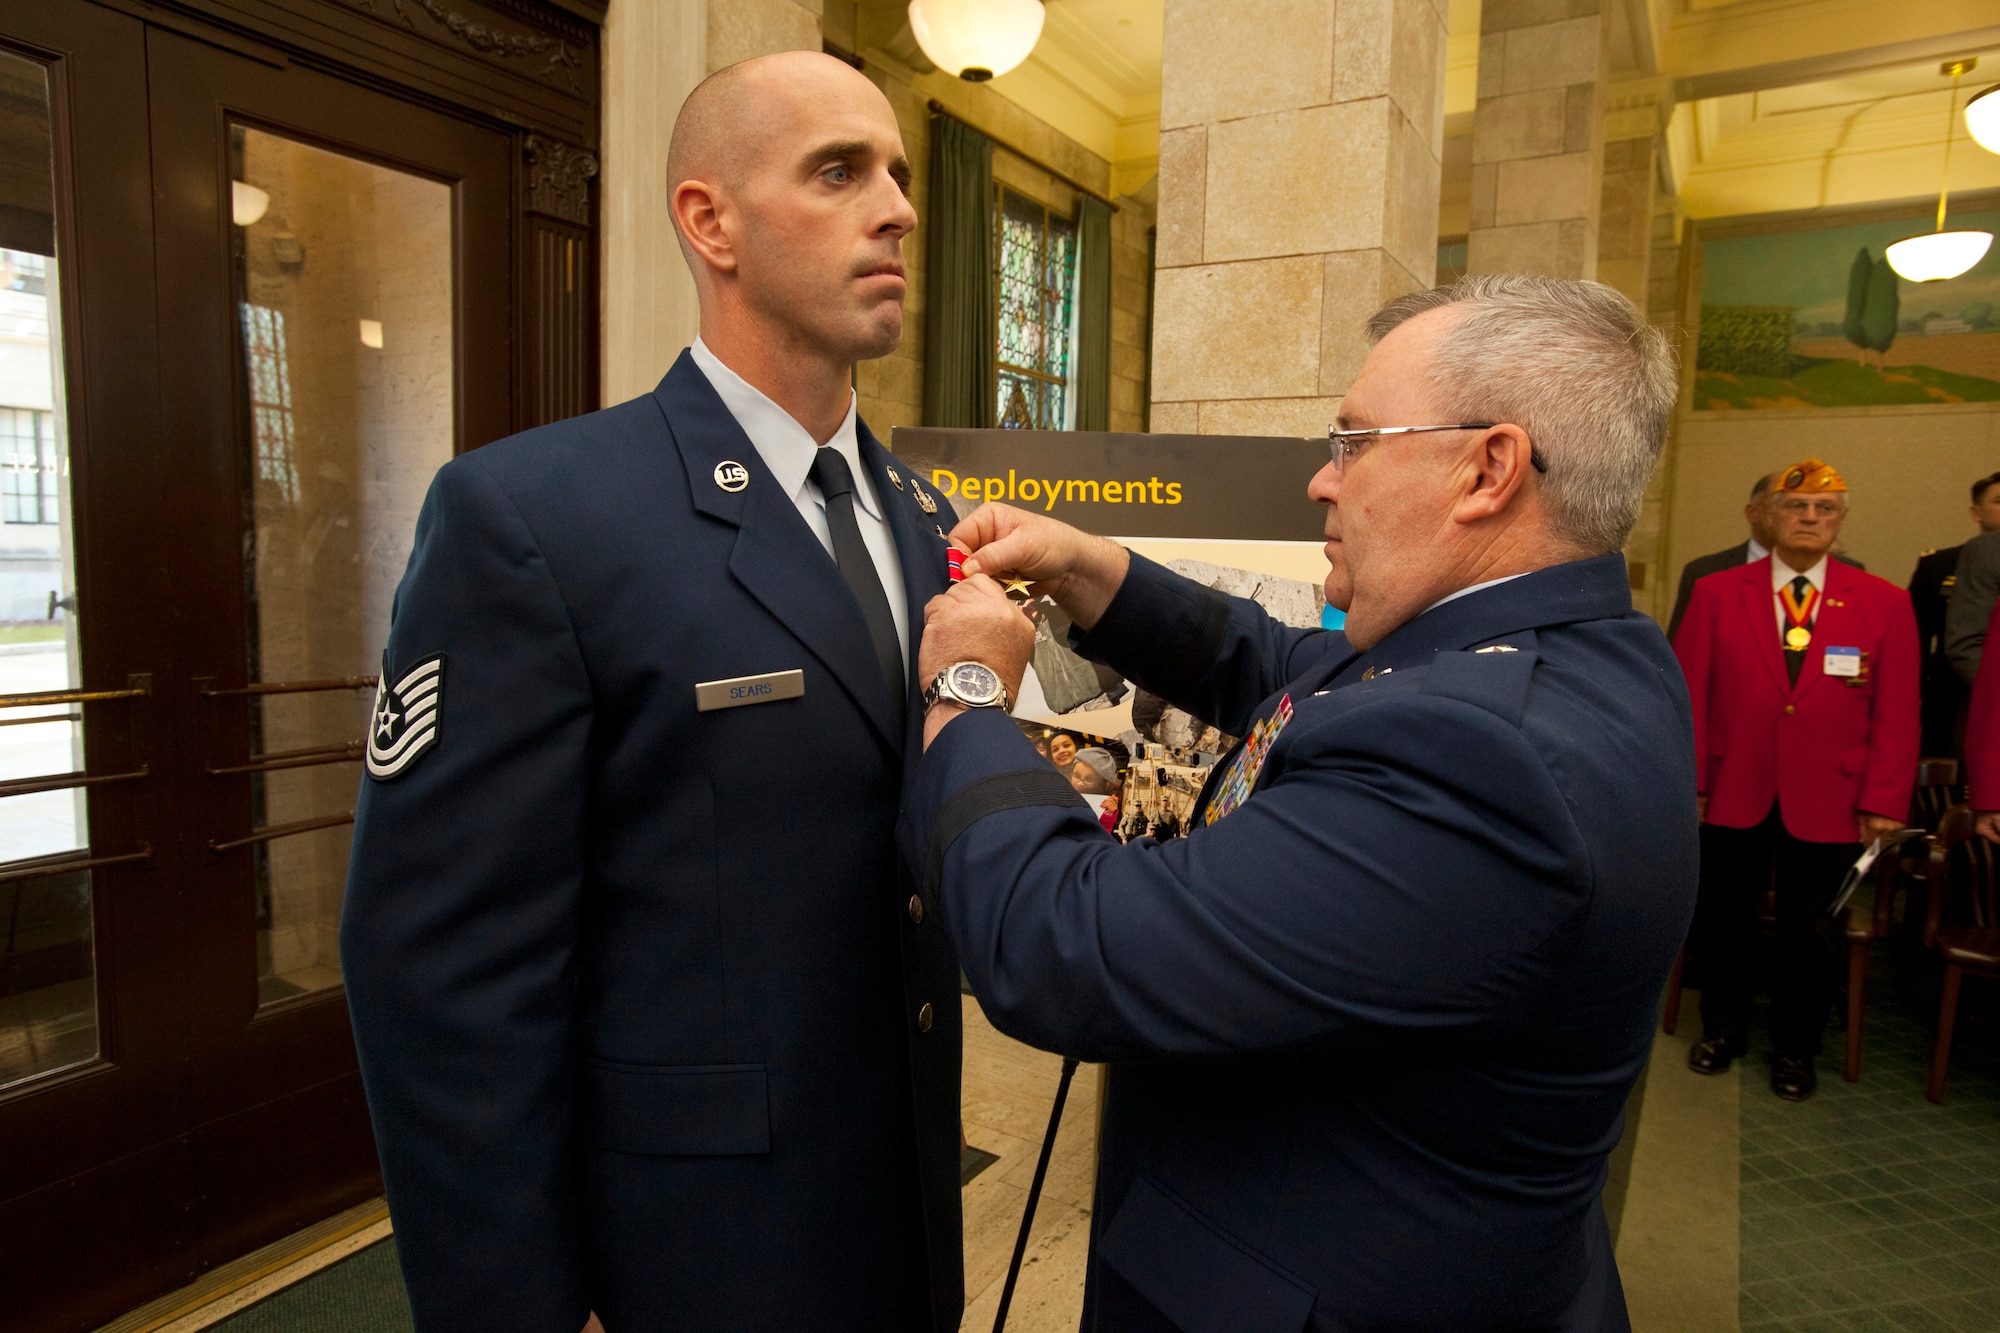 A picture of New Jersey Air National Guard Tech. Sgt. Michael Sears being awarded the Bronze Star by Brig. Gen. Michael L. Cunniff, the adjutant general.